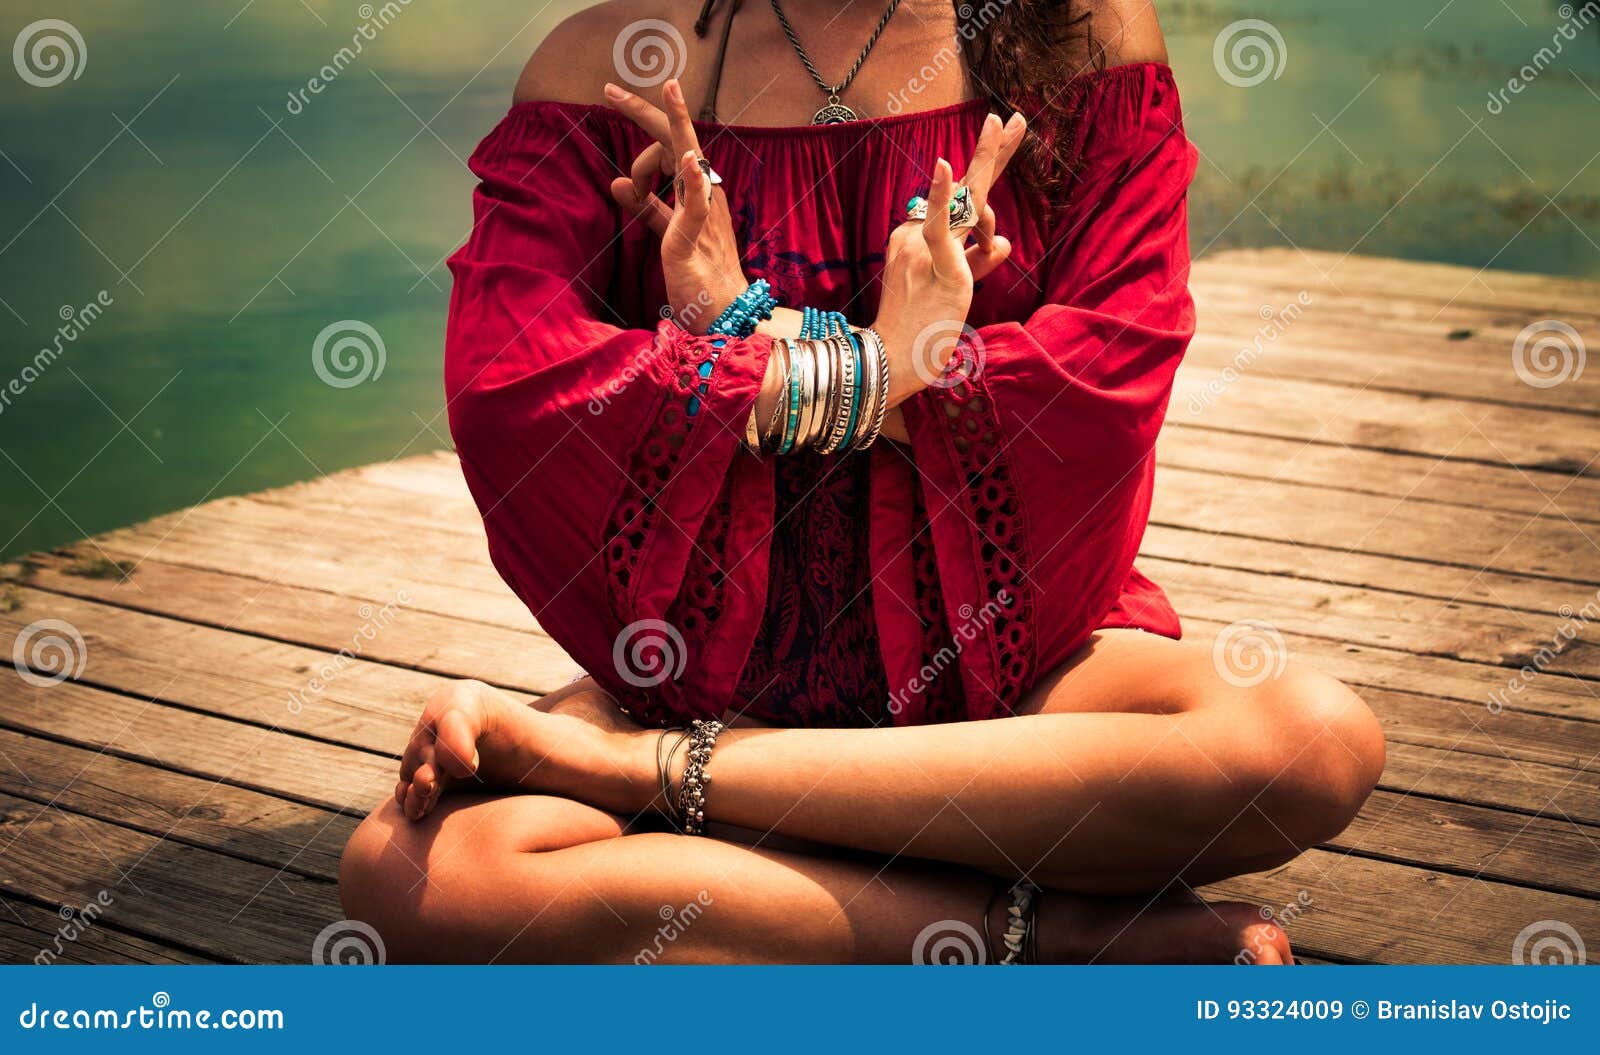 young woman in a meditative yoga position outdoor